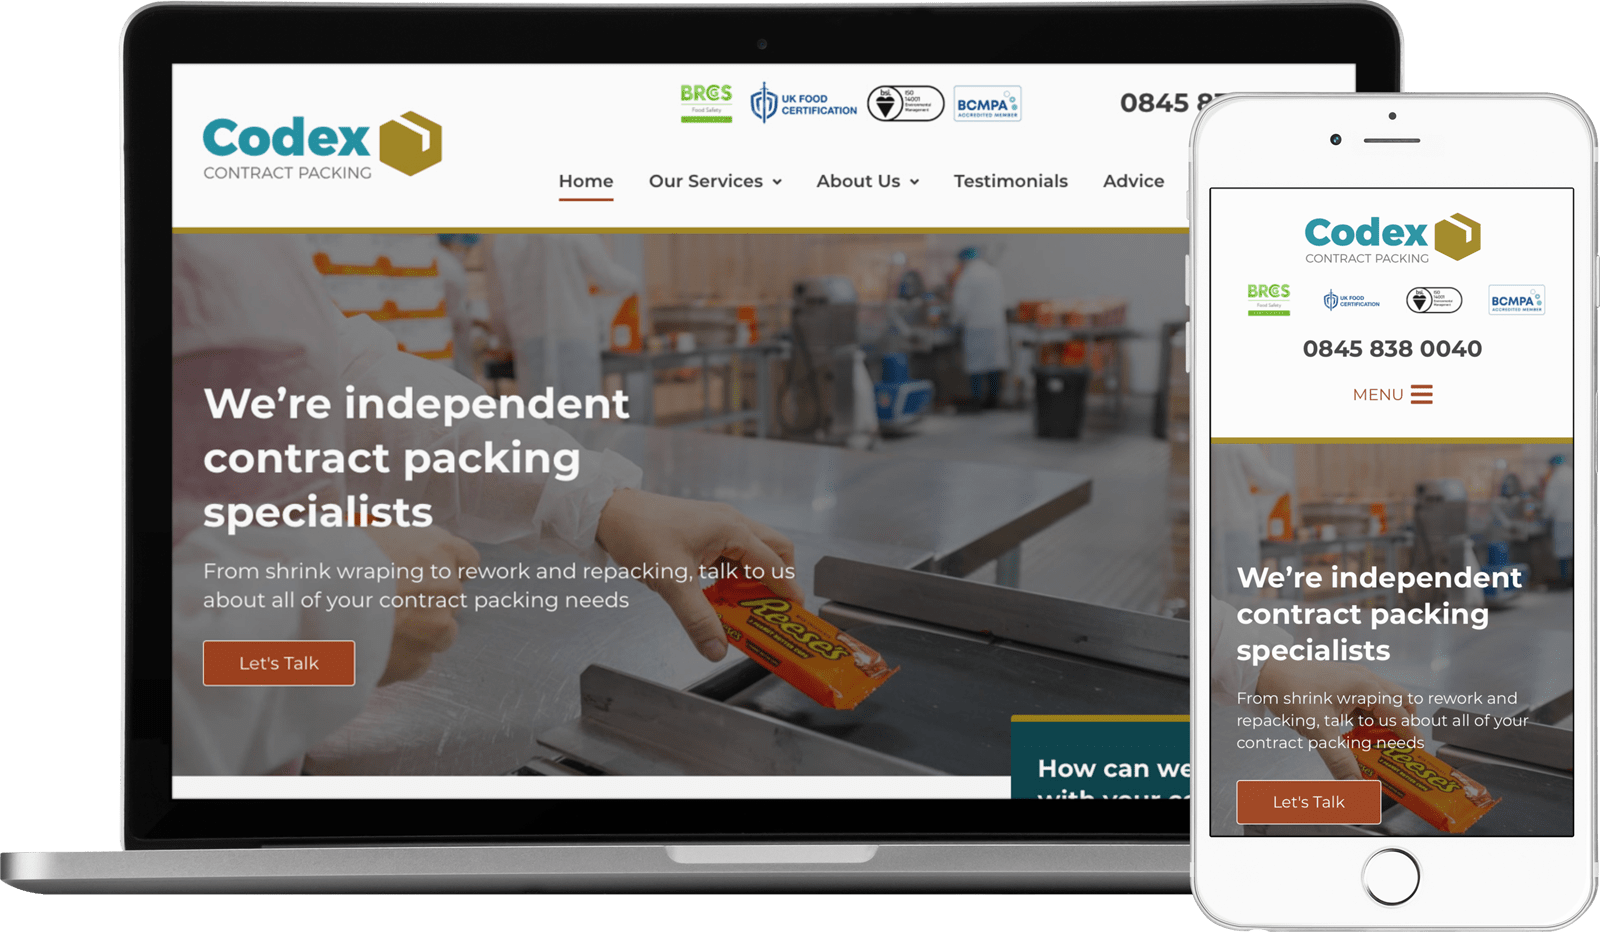 Website Redesign for Codex Contract Packing in Leighton Buzzard